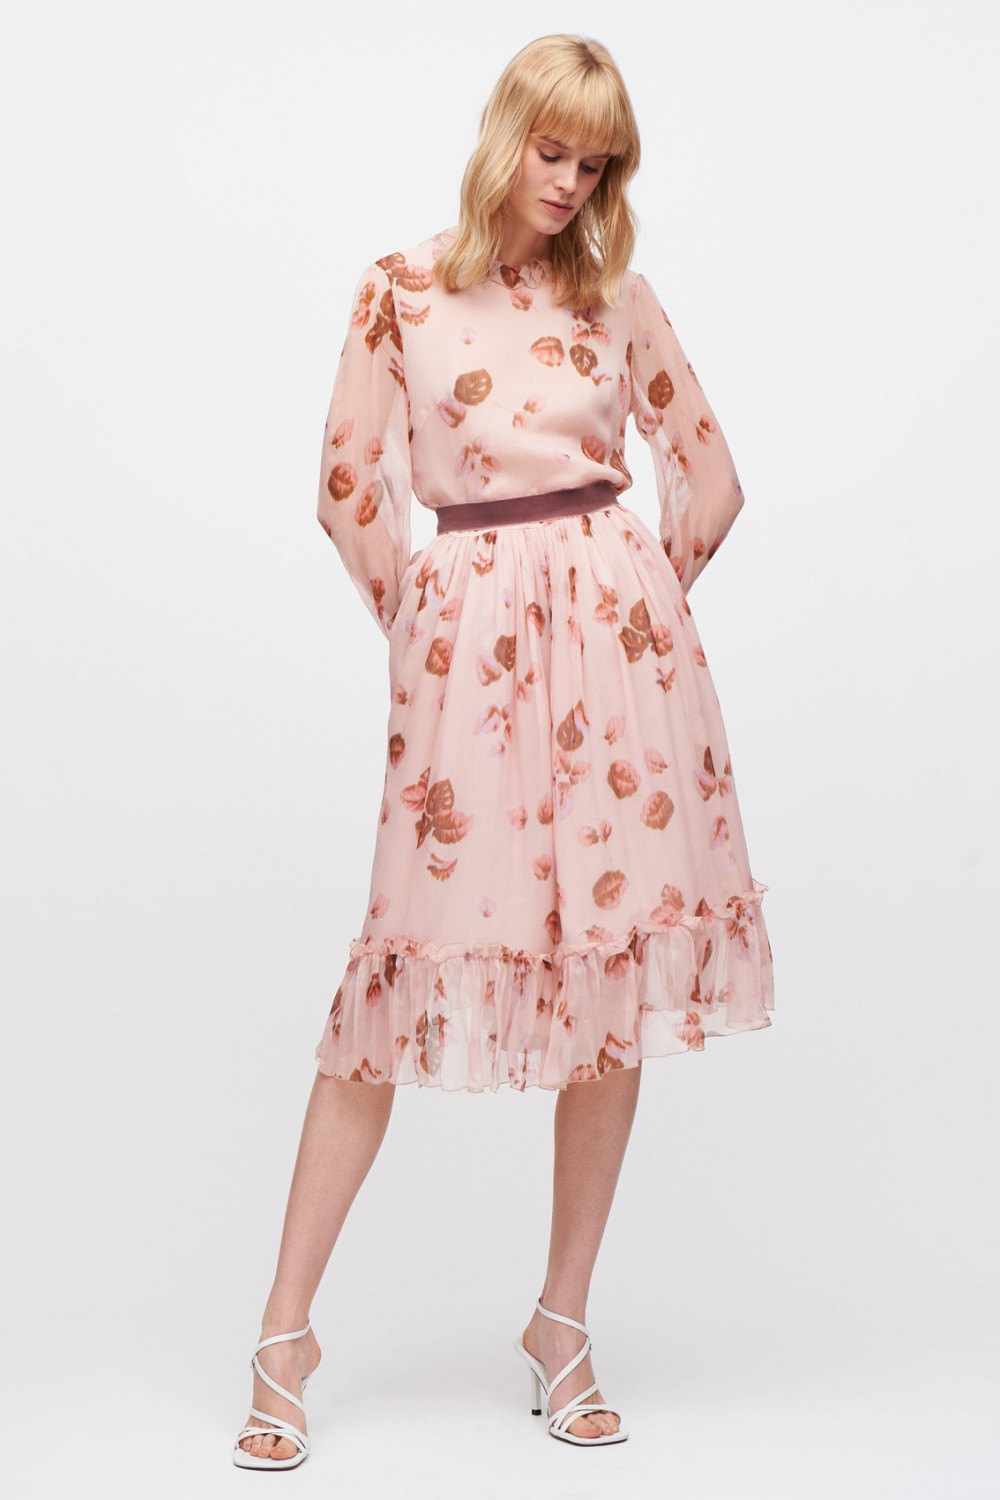 Pink dress with floral pattern and rouches